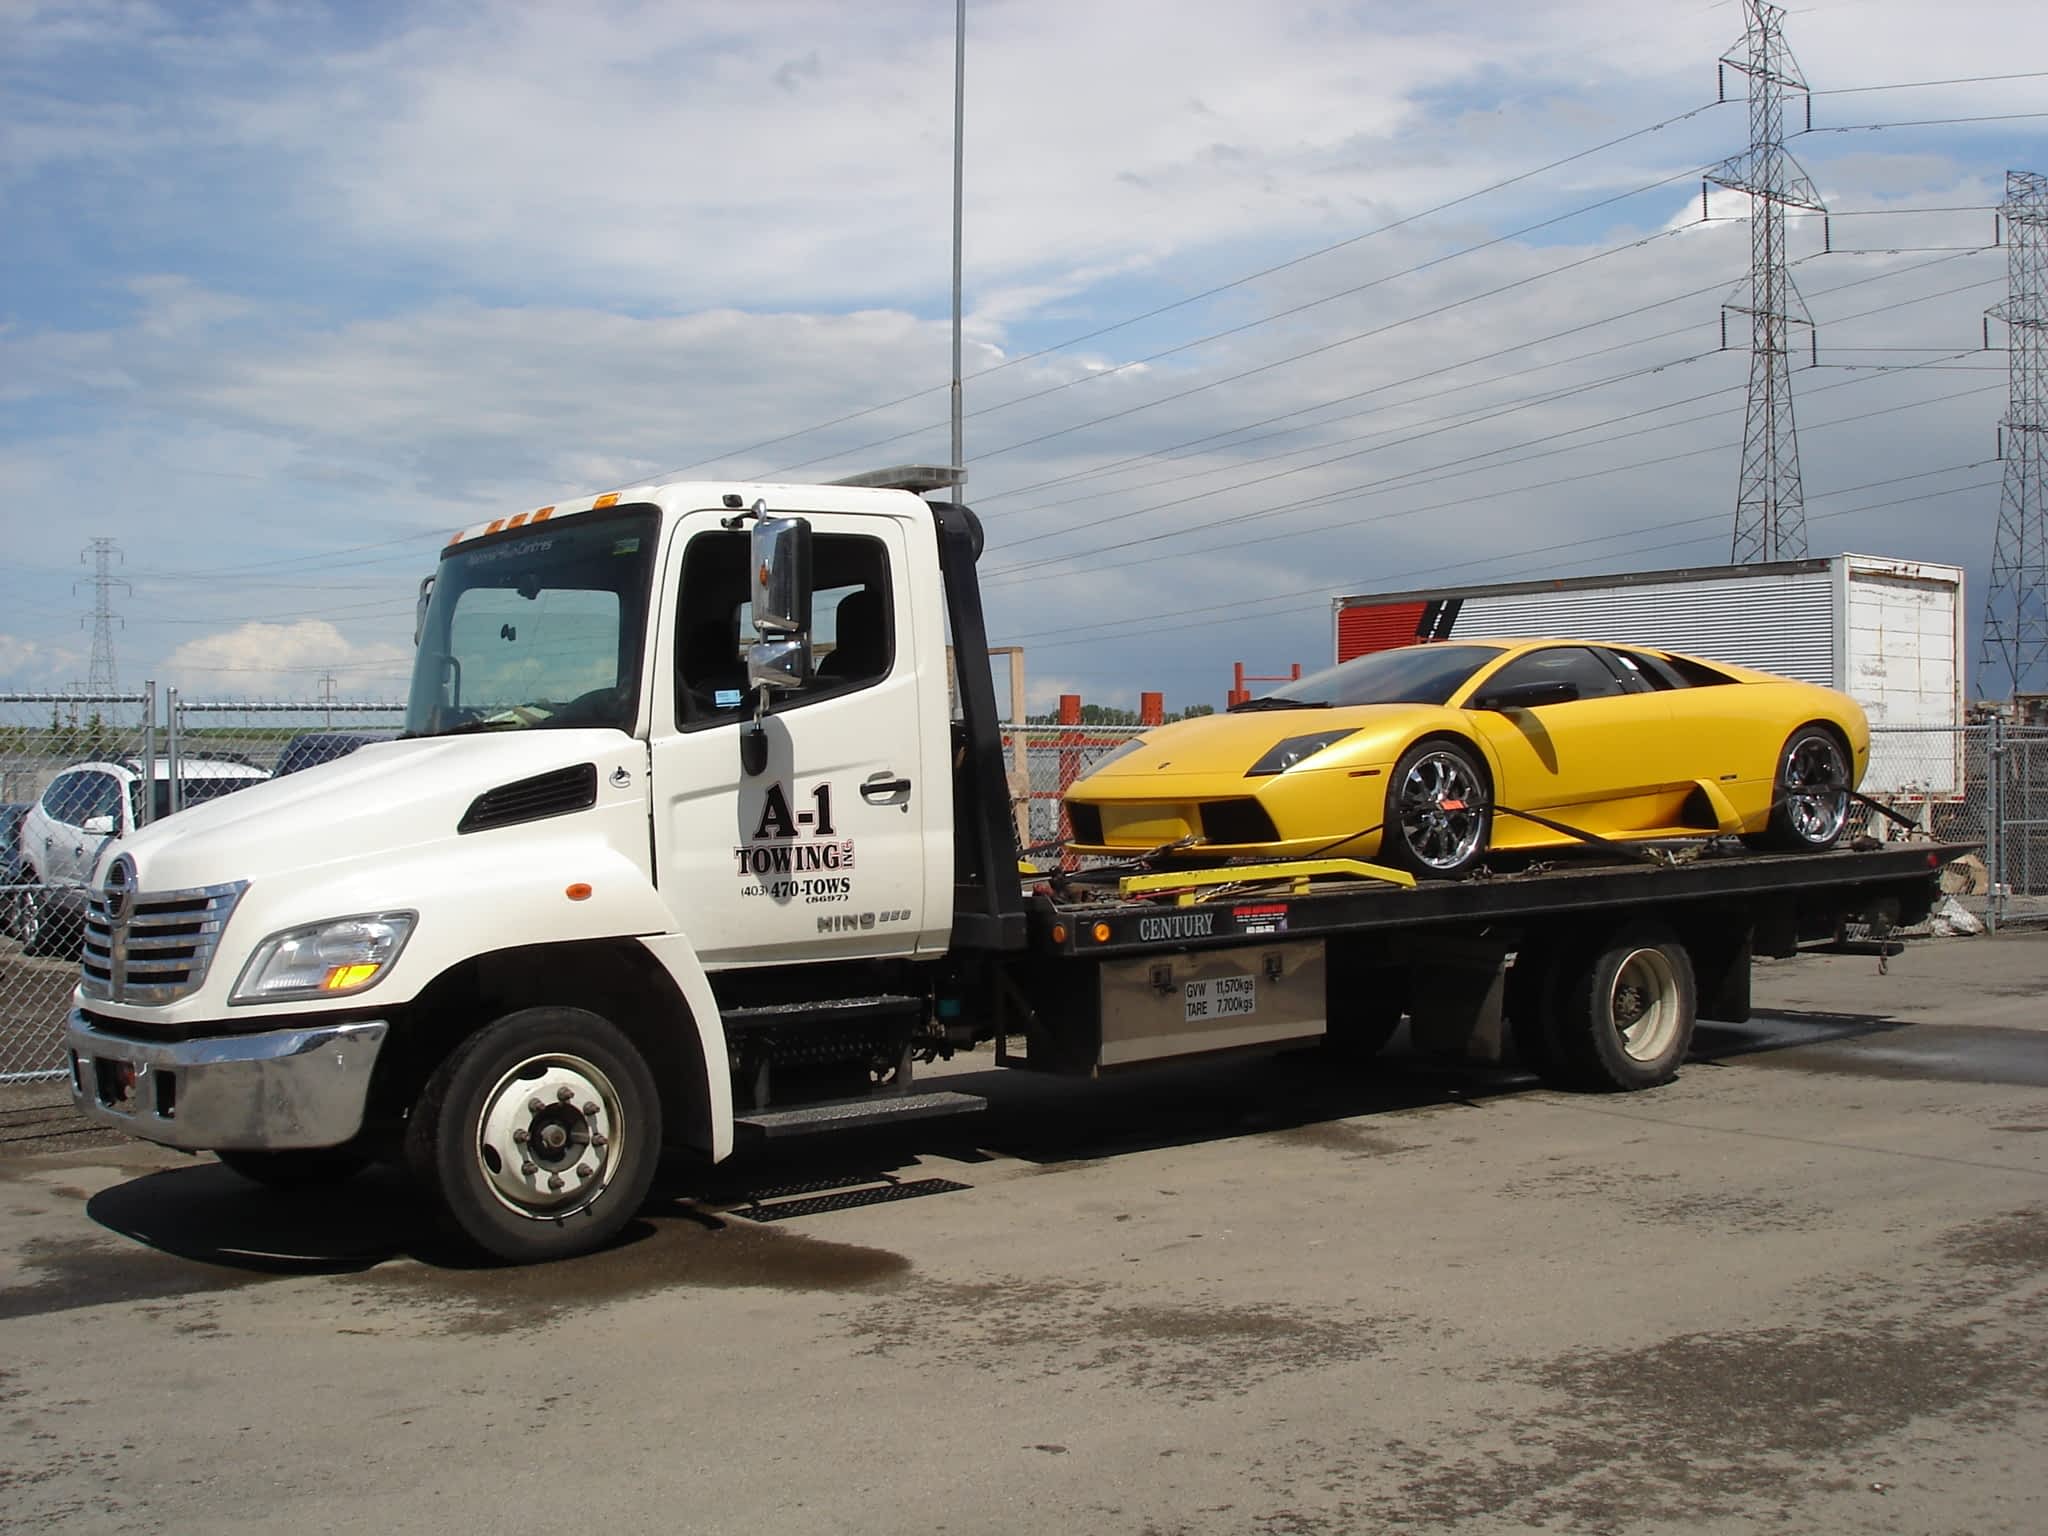 photo A-1 Towing Inc